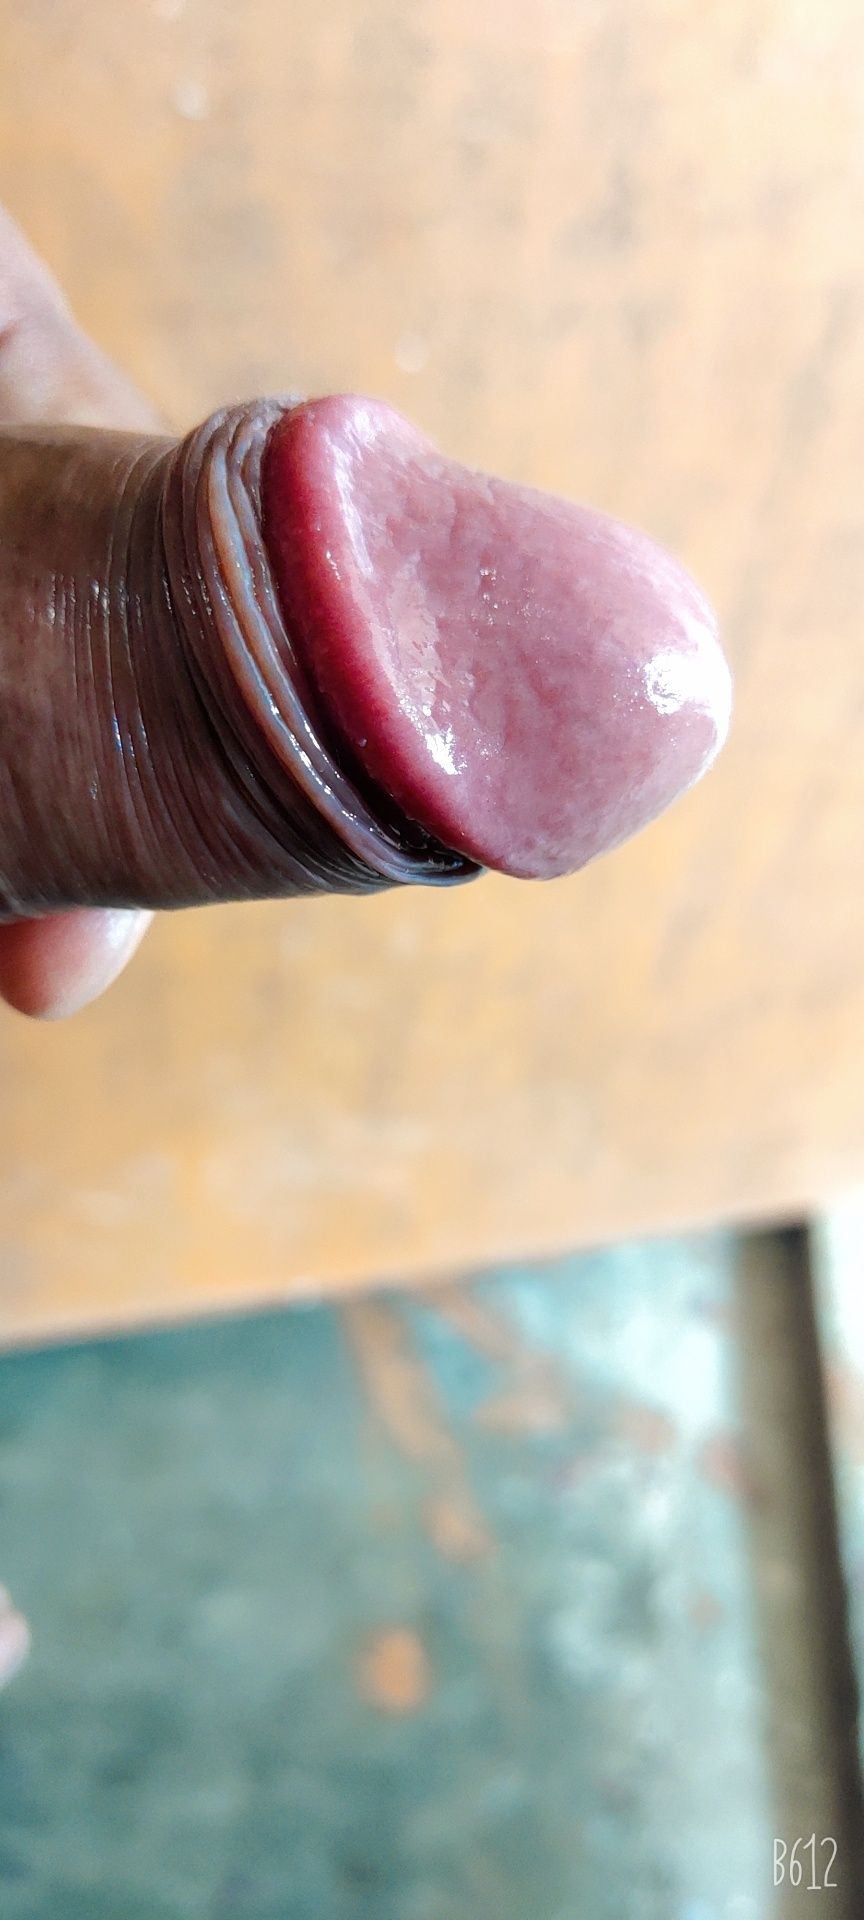 My hot cock #2